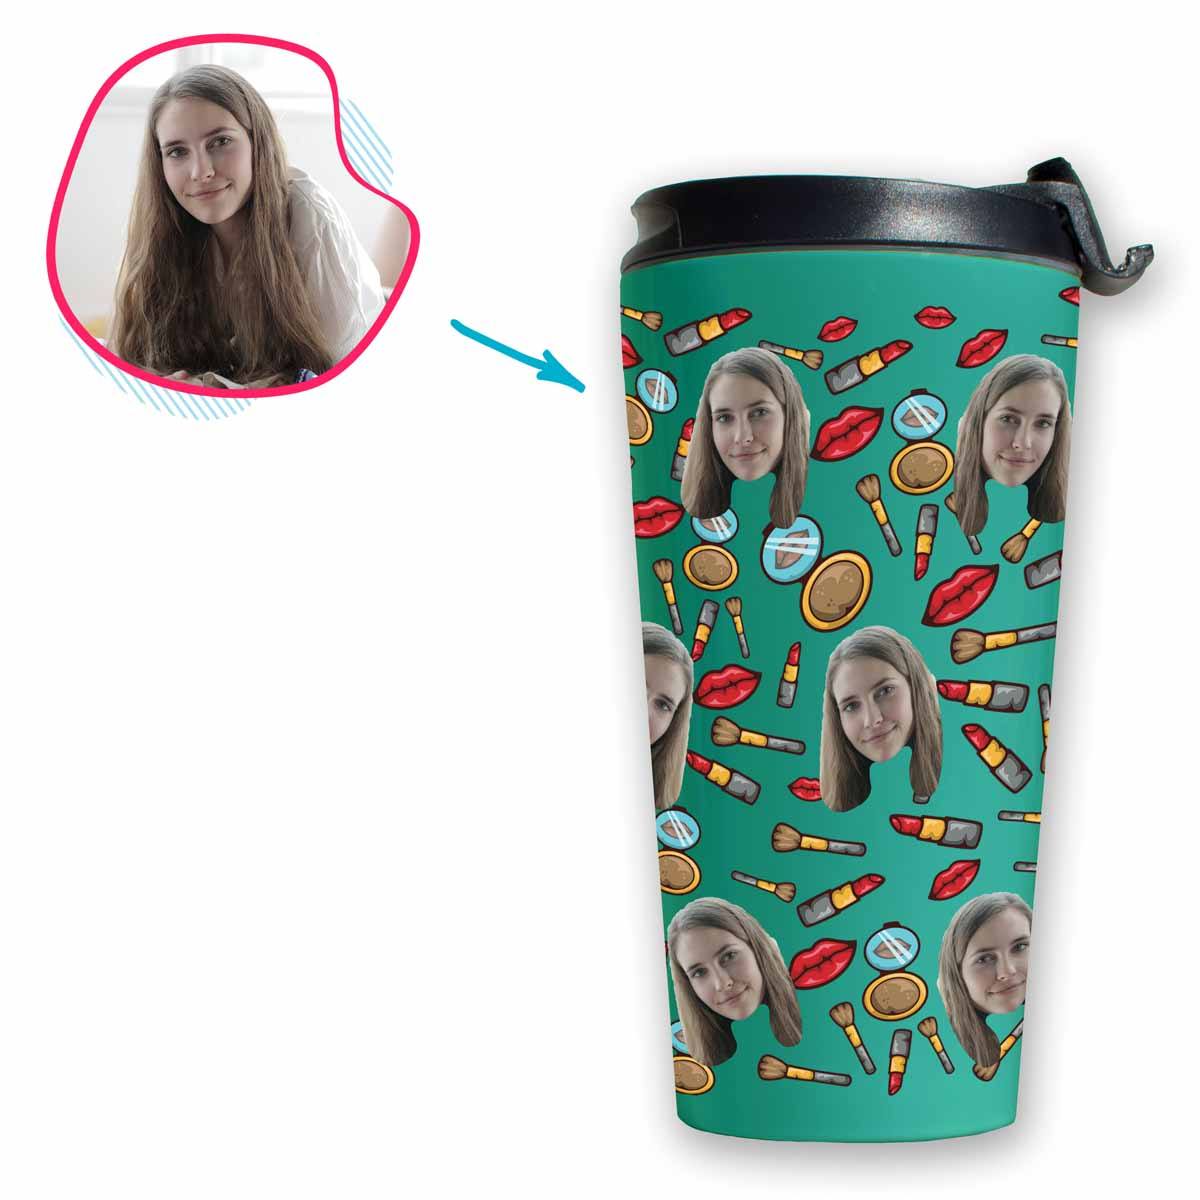 Mint Makeup personalized travel mug with photo of face printed on it